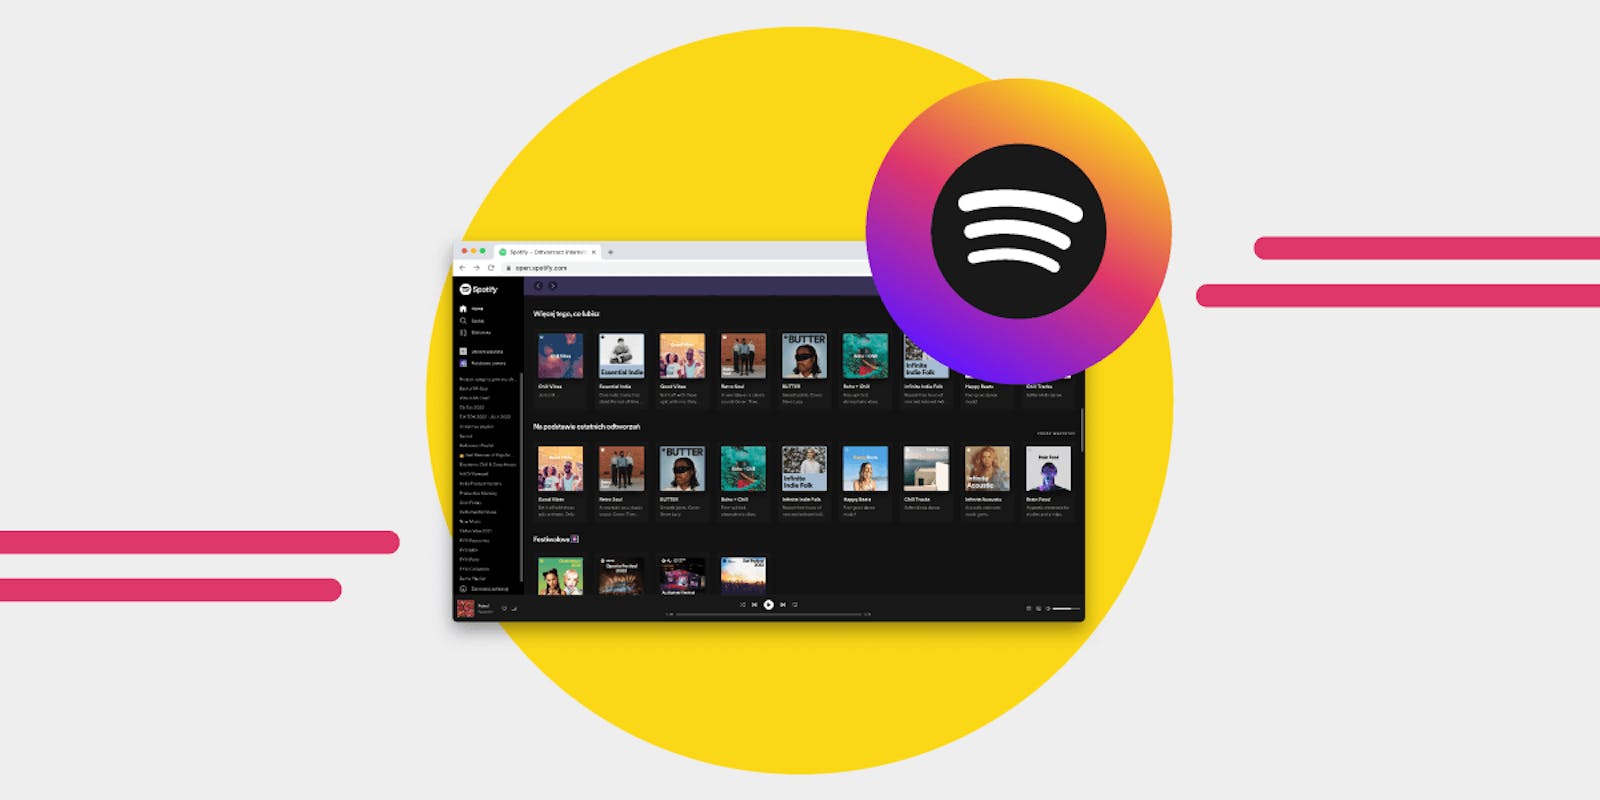 Updates on the 'Album' tab and 'save' feature - The Spotify Community